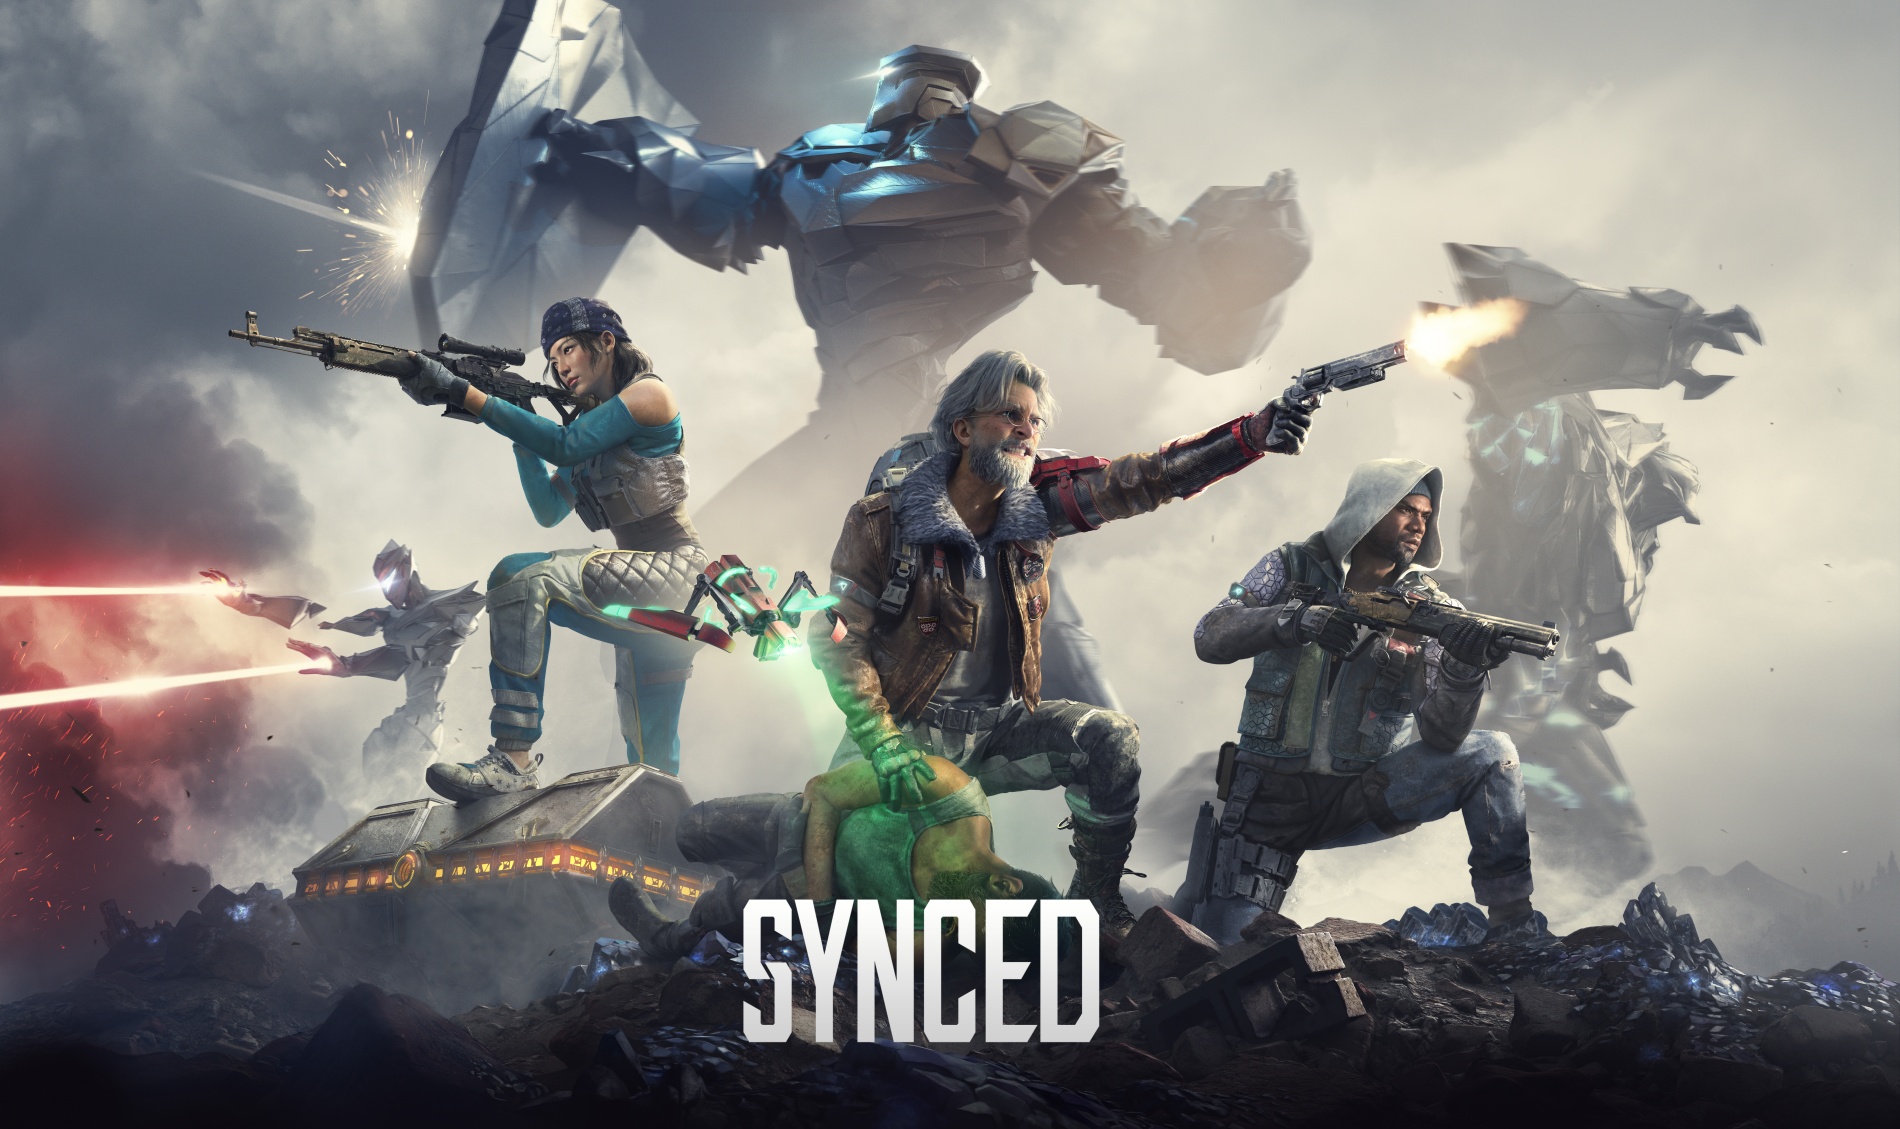 SYNCED, the new Level Infinite shooter, announces its free release this summer